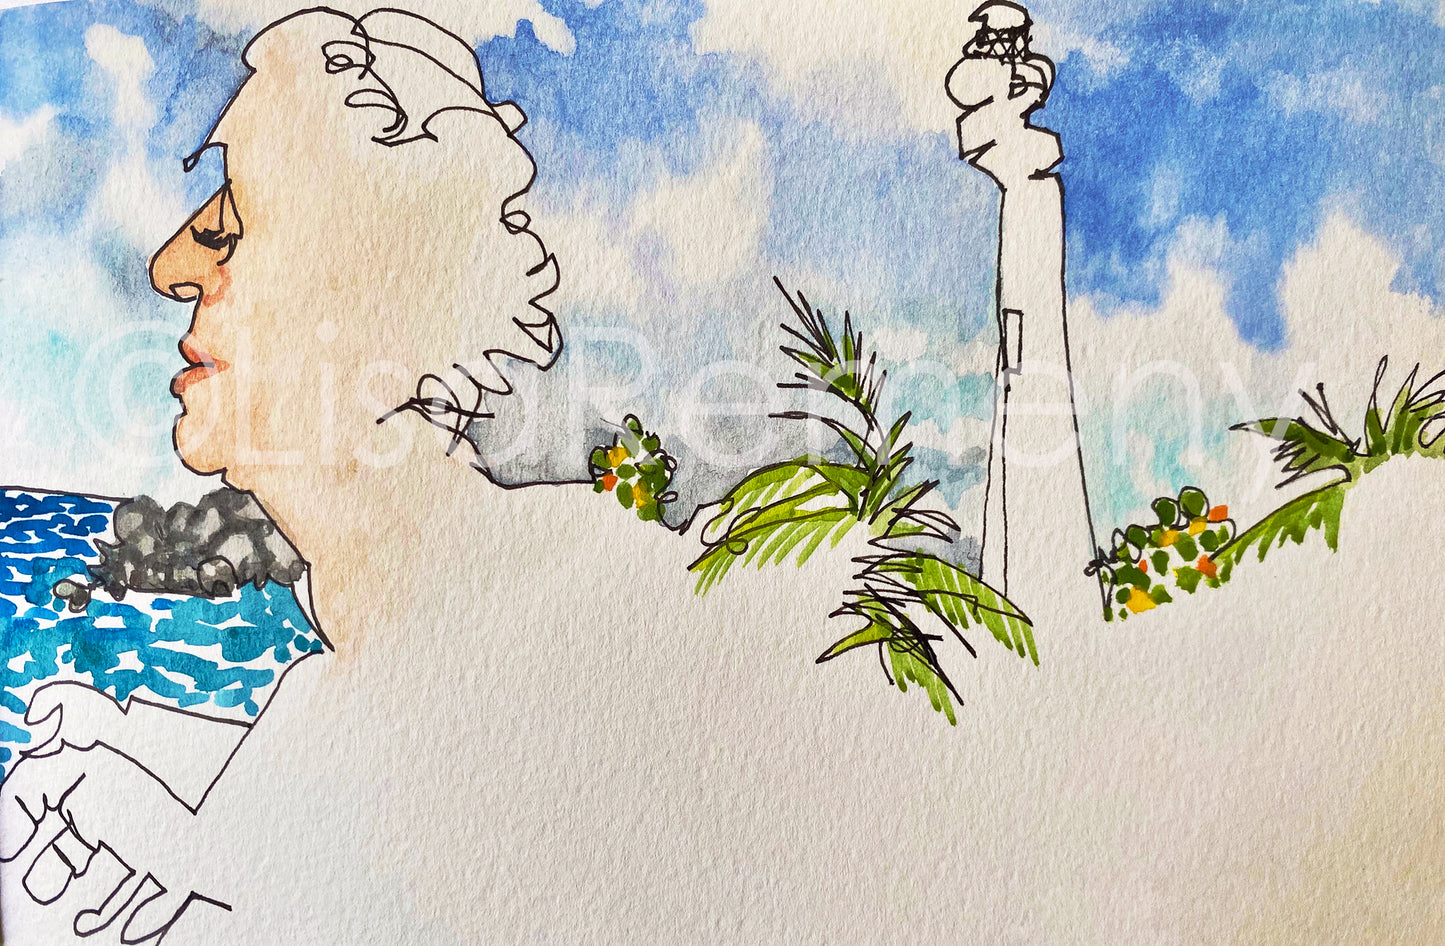 Watercolor+ Ink on Paper - Tuesdays at Cape Florida